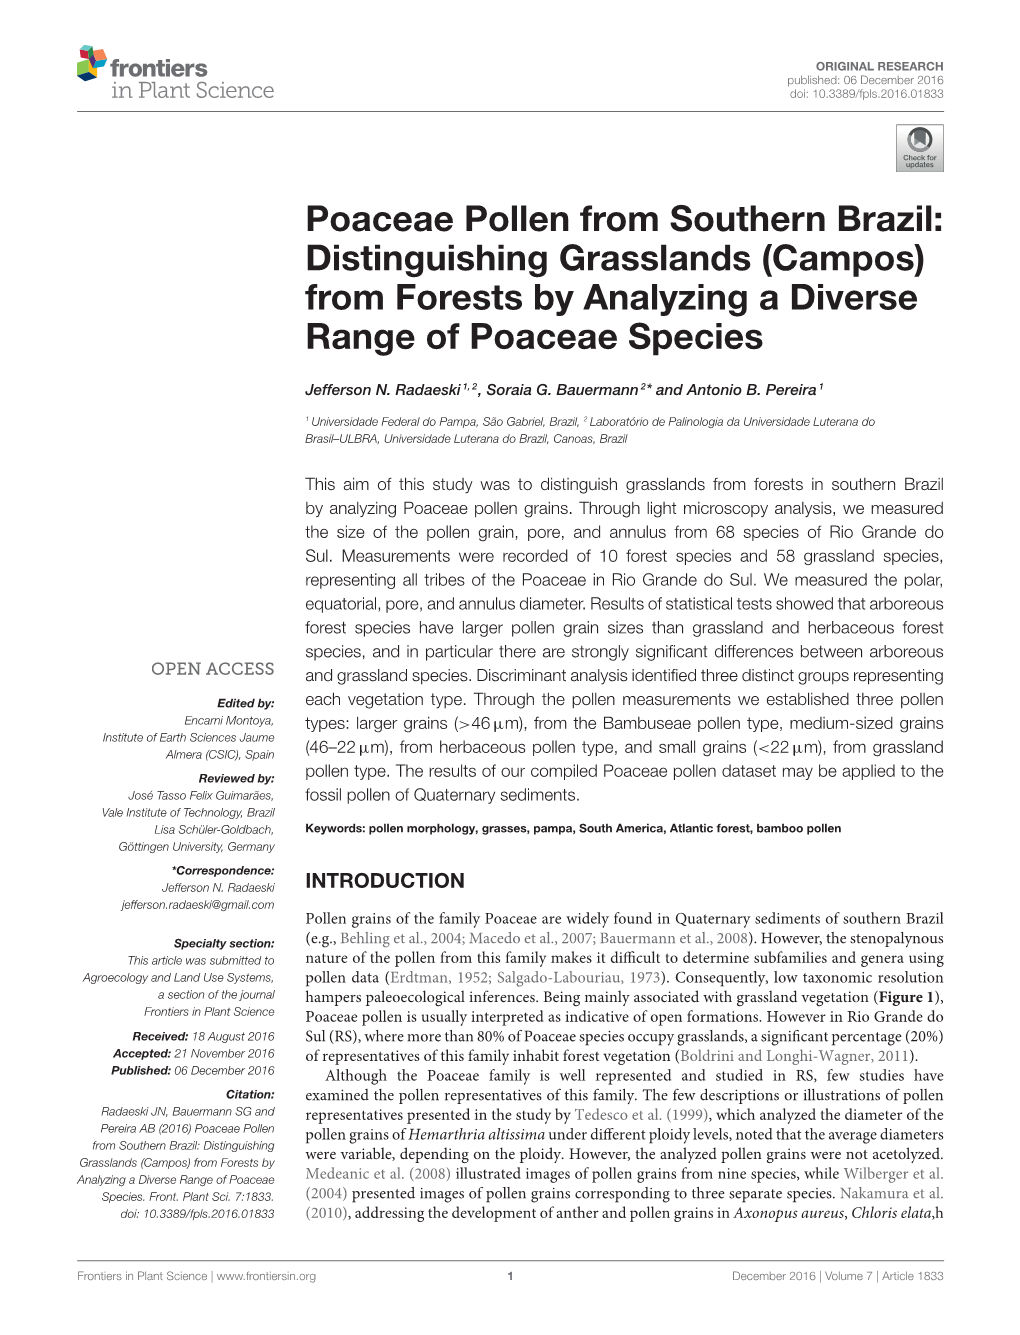 Poaceae Pollen from Southern Brazil: Distinguishing Grasslands (Campos) from Forests by Analyzing a Diverse Range of Poaceae Species